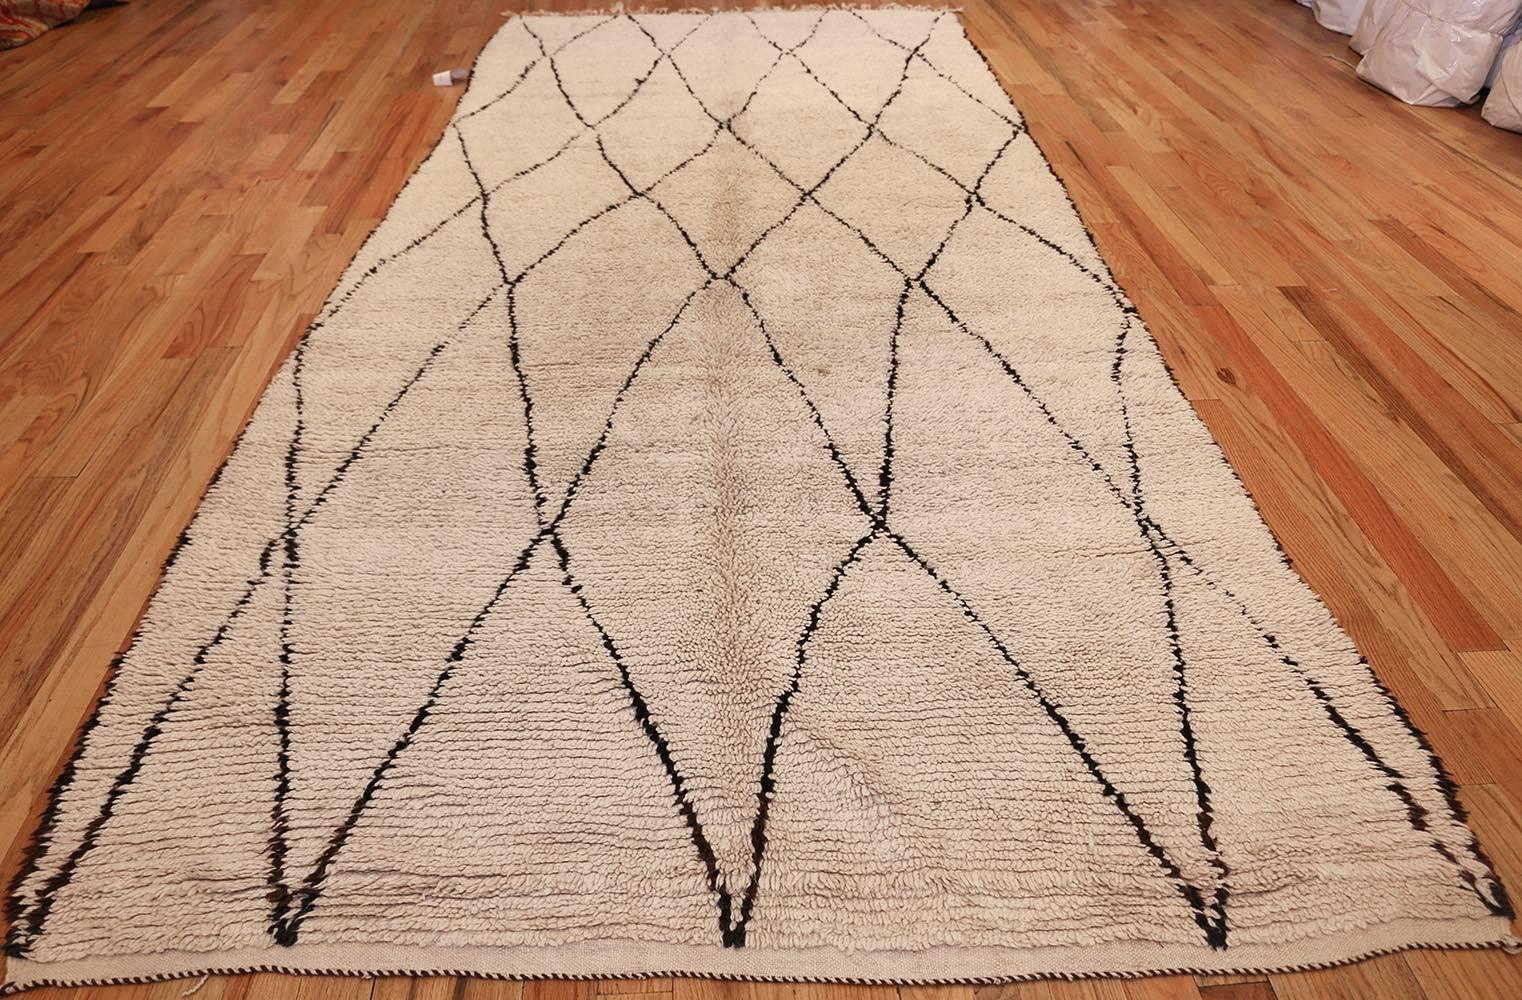 Wool Cream and Black Vintage Moroccan Beni Ourain Carpet. Size: 5' 10